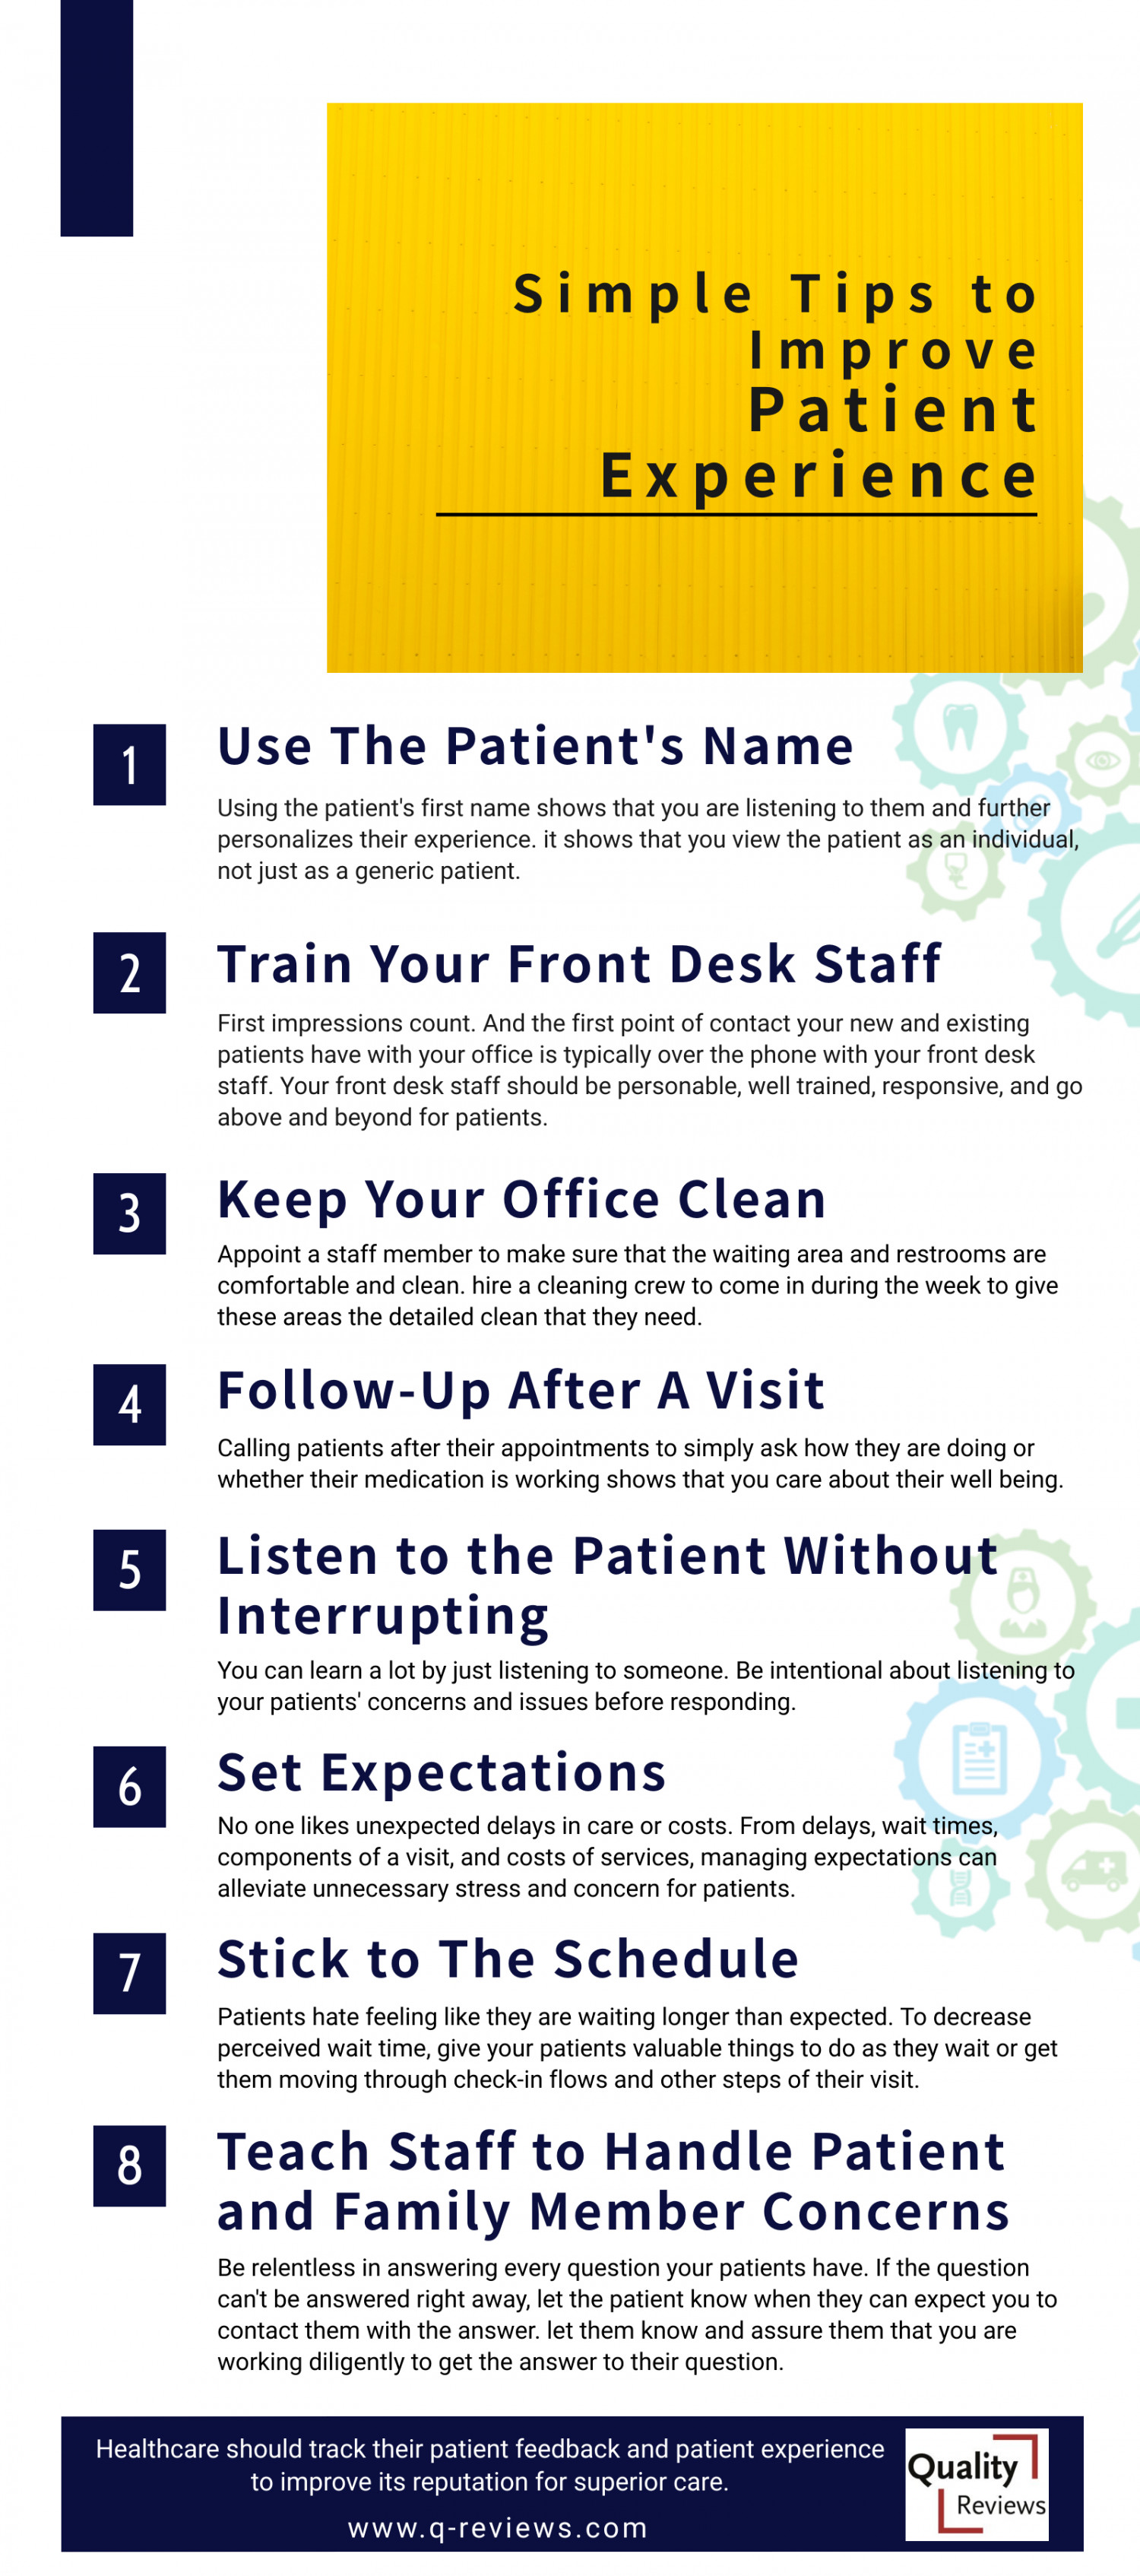 Simple Tips to Improve Patient Experience Infographic